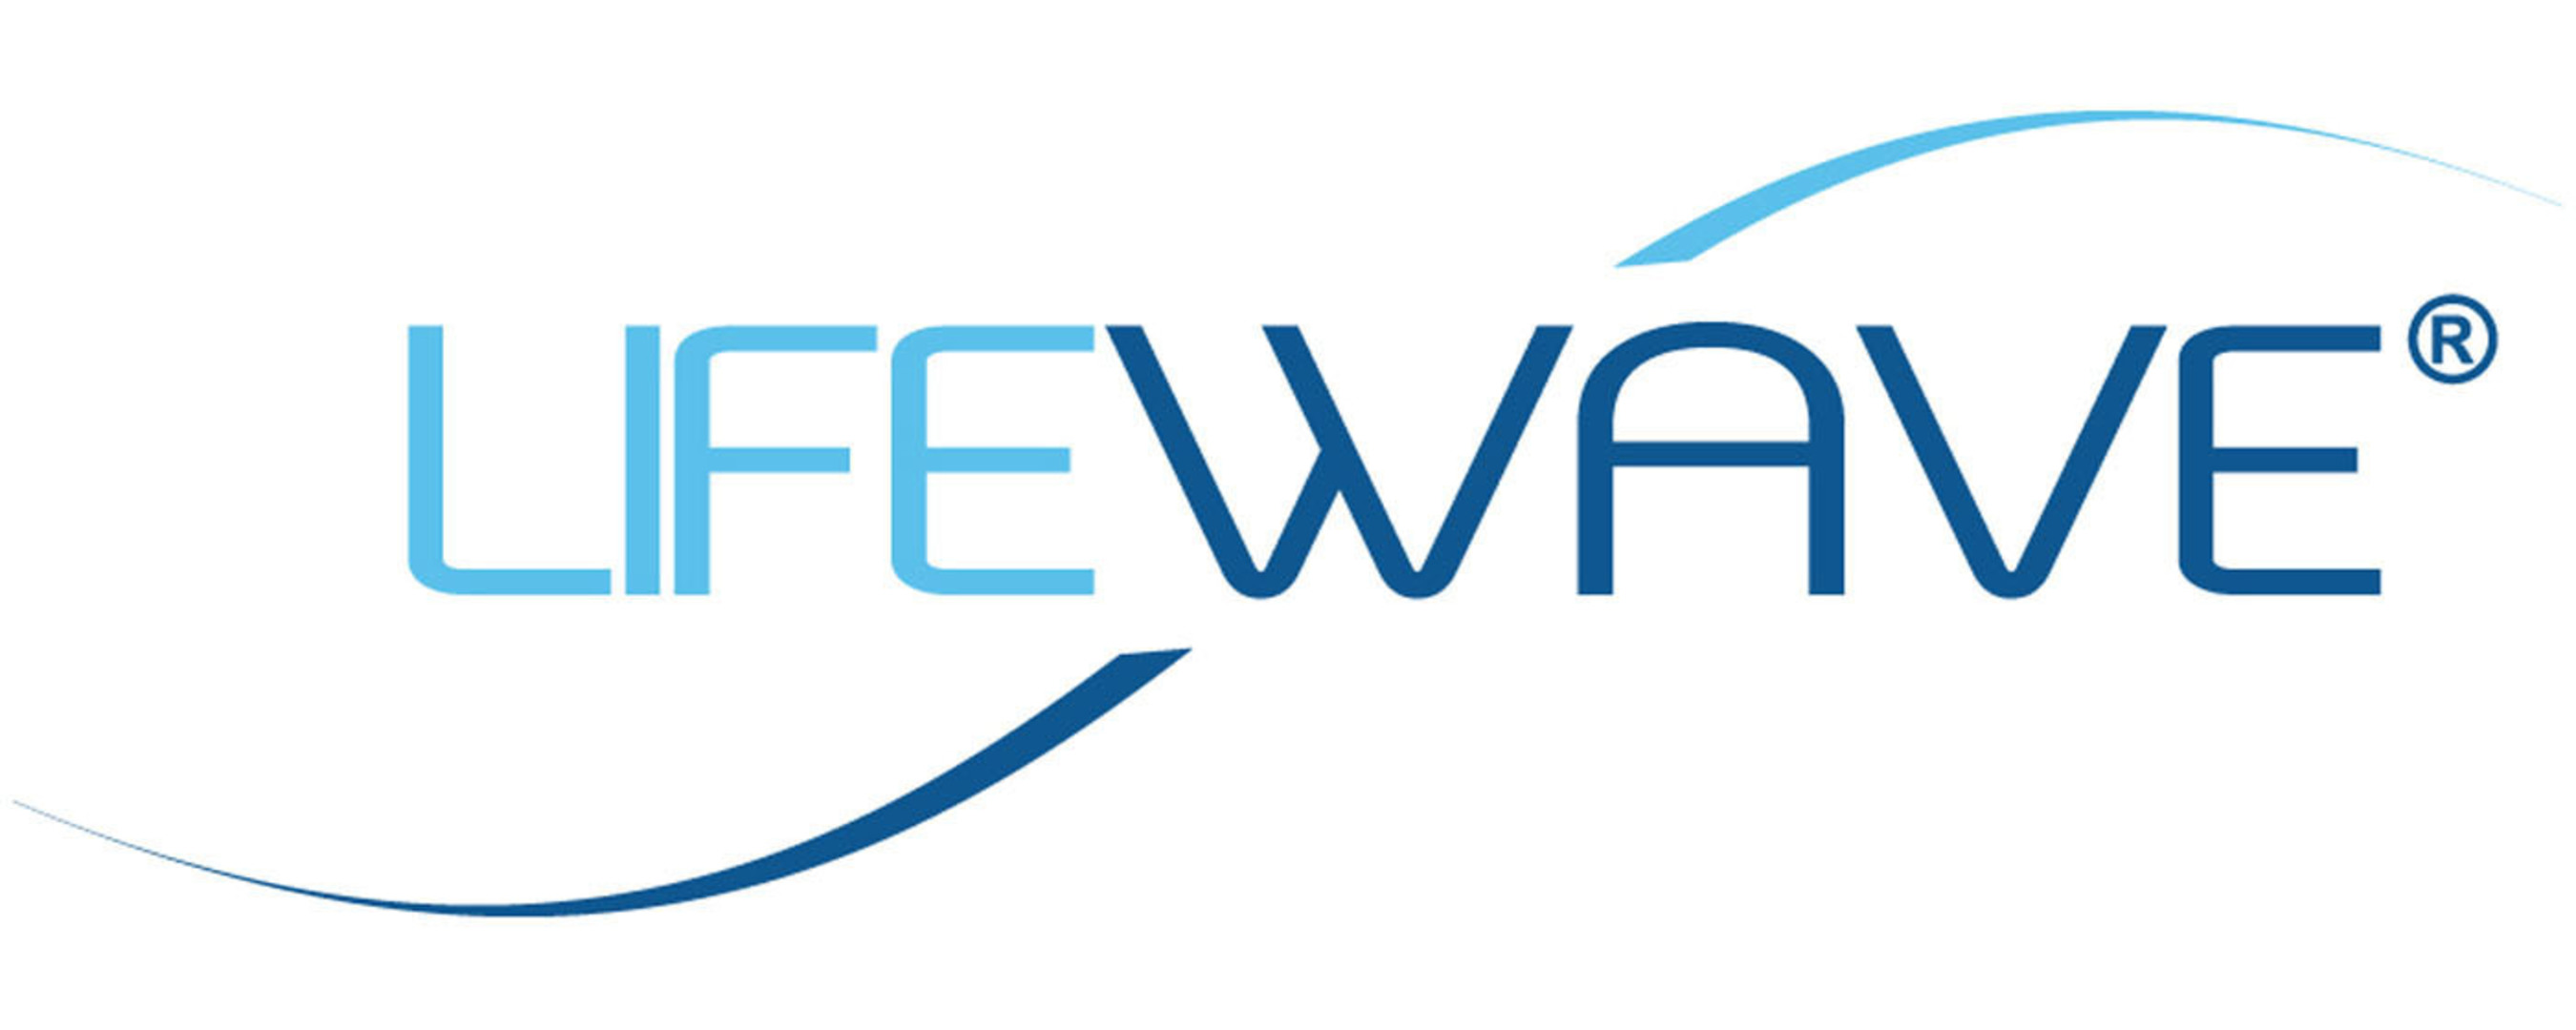 LifeWave Makes Inc. 5000 List of Fastest-Growing Companies for Third Consecutive Year